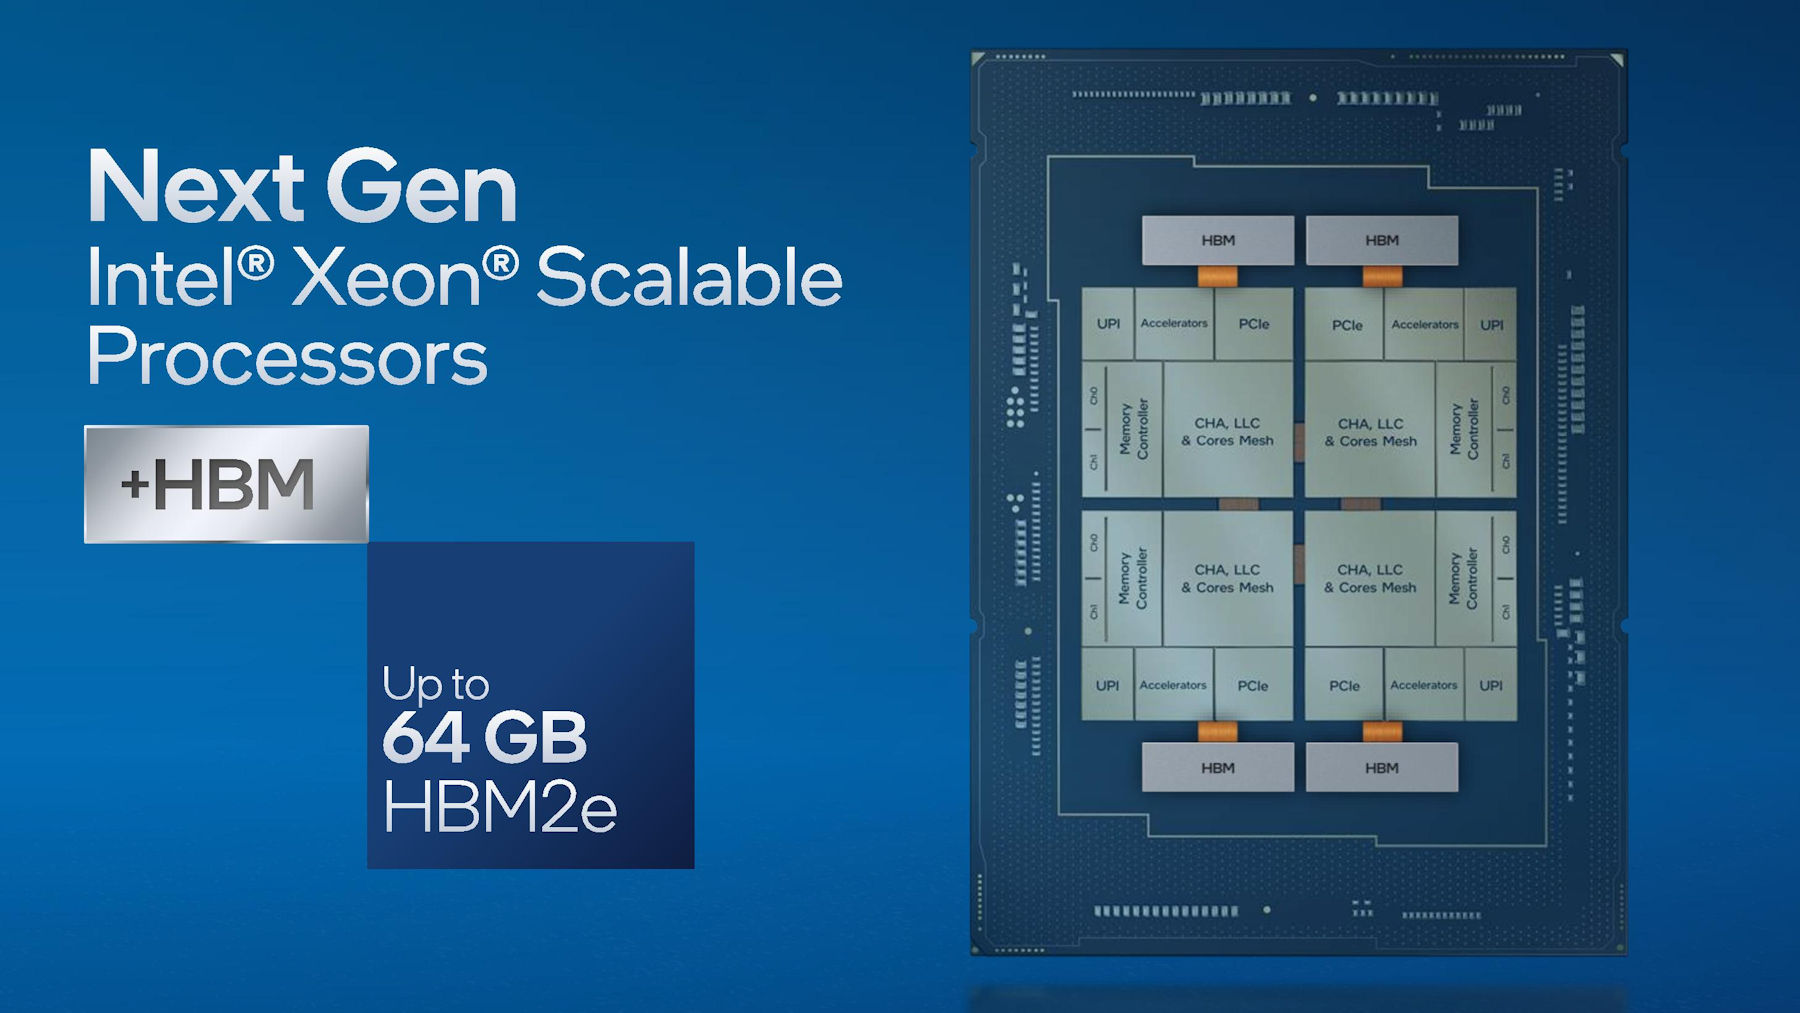 Intel Xeon Sapphire Rapids feature up to 64GB HBM2e memory